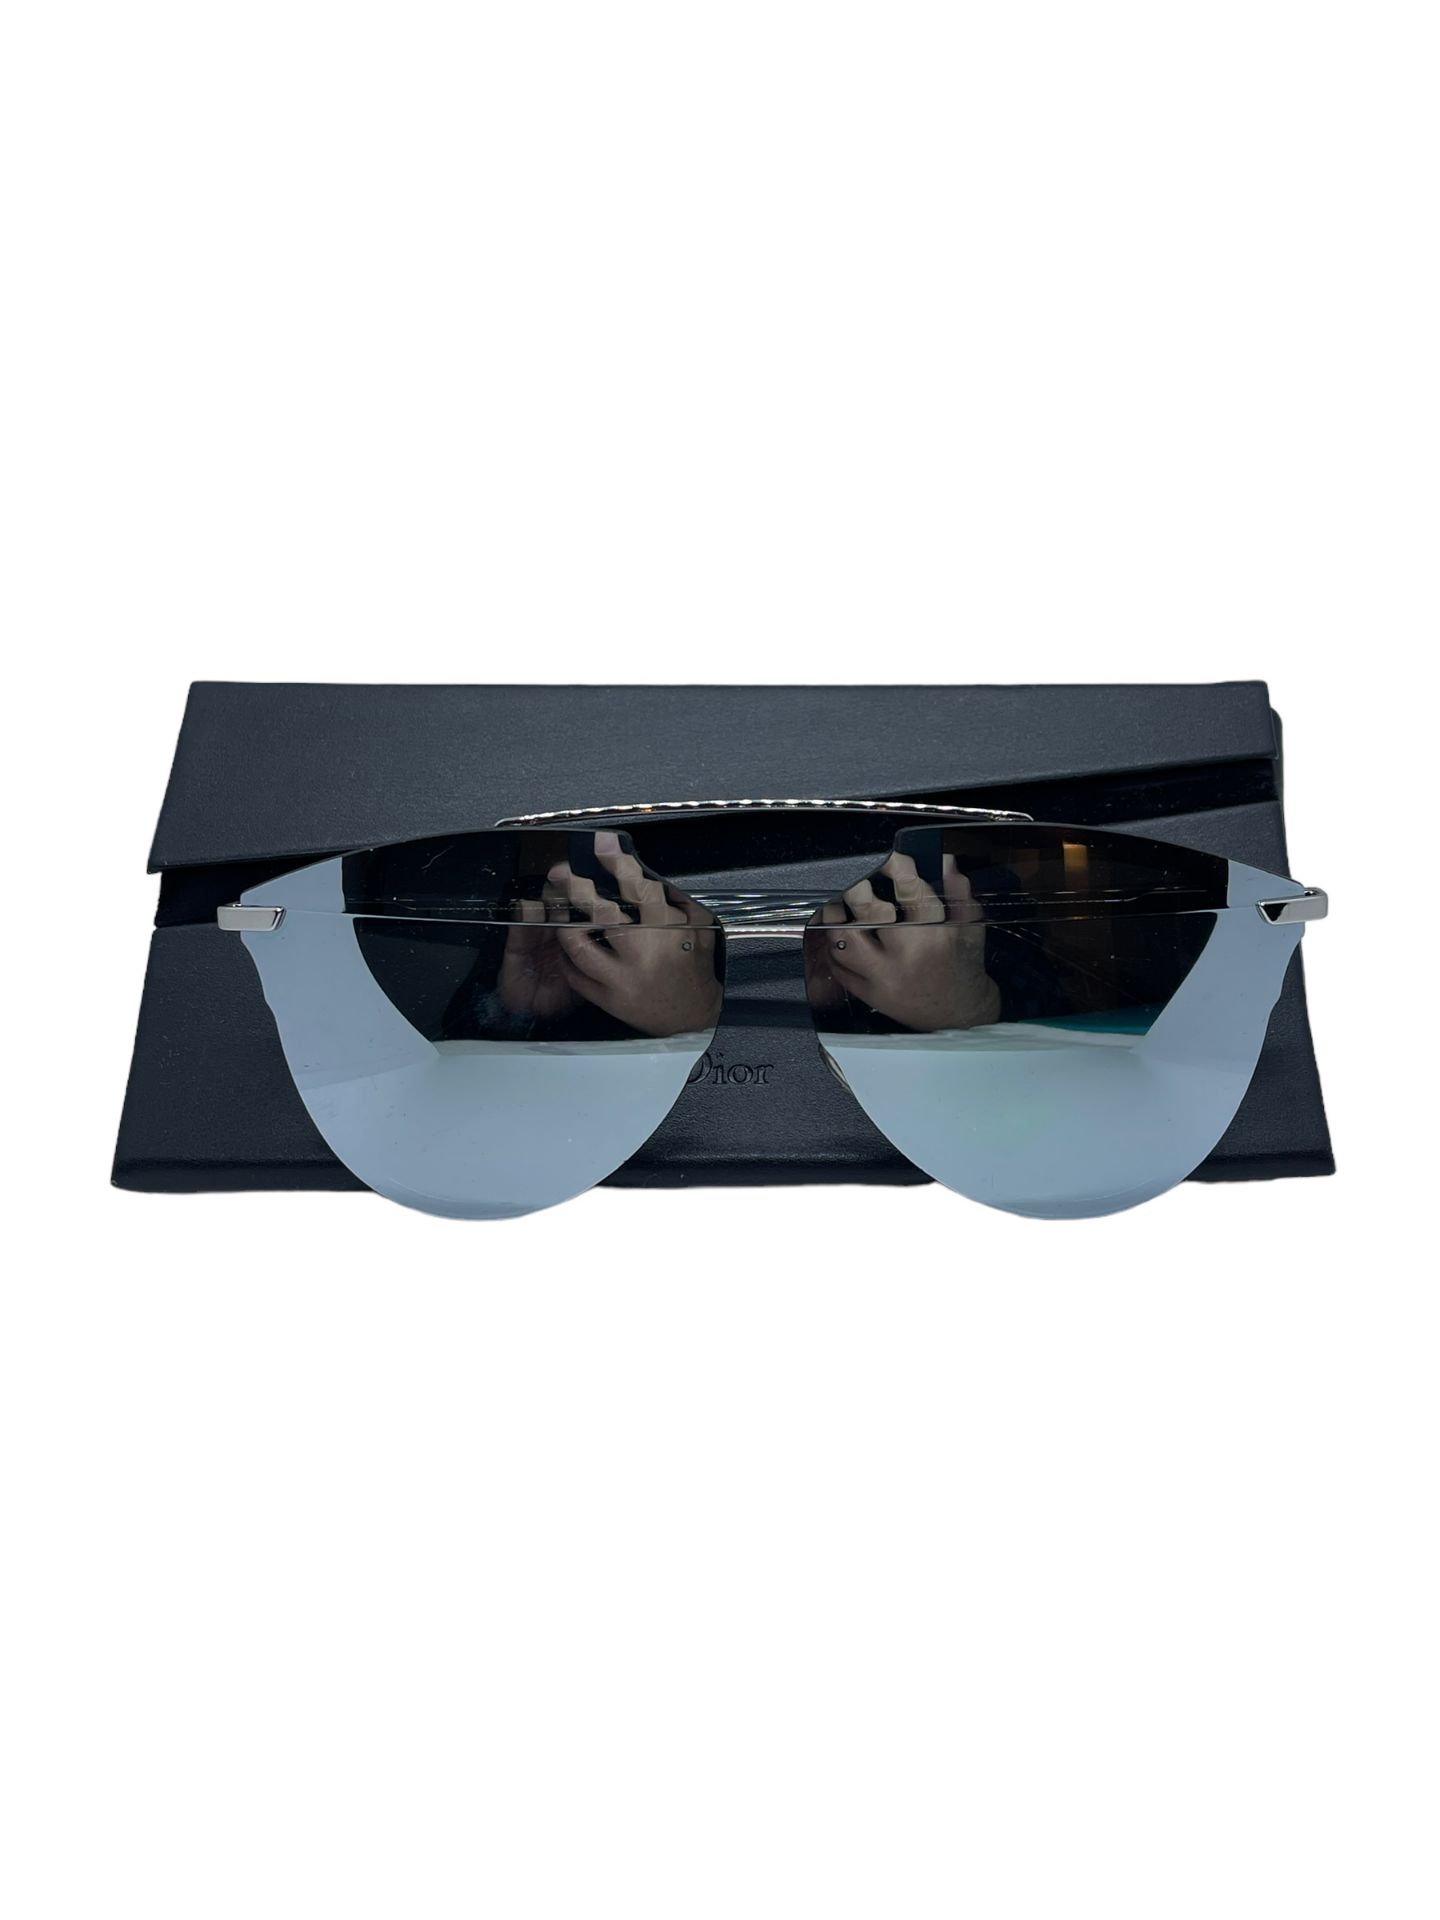 DIOR UNISEX SUNGLASSES XDEMO WITH BCASE PAPER ECT - Image 2 of 6